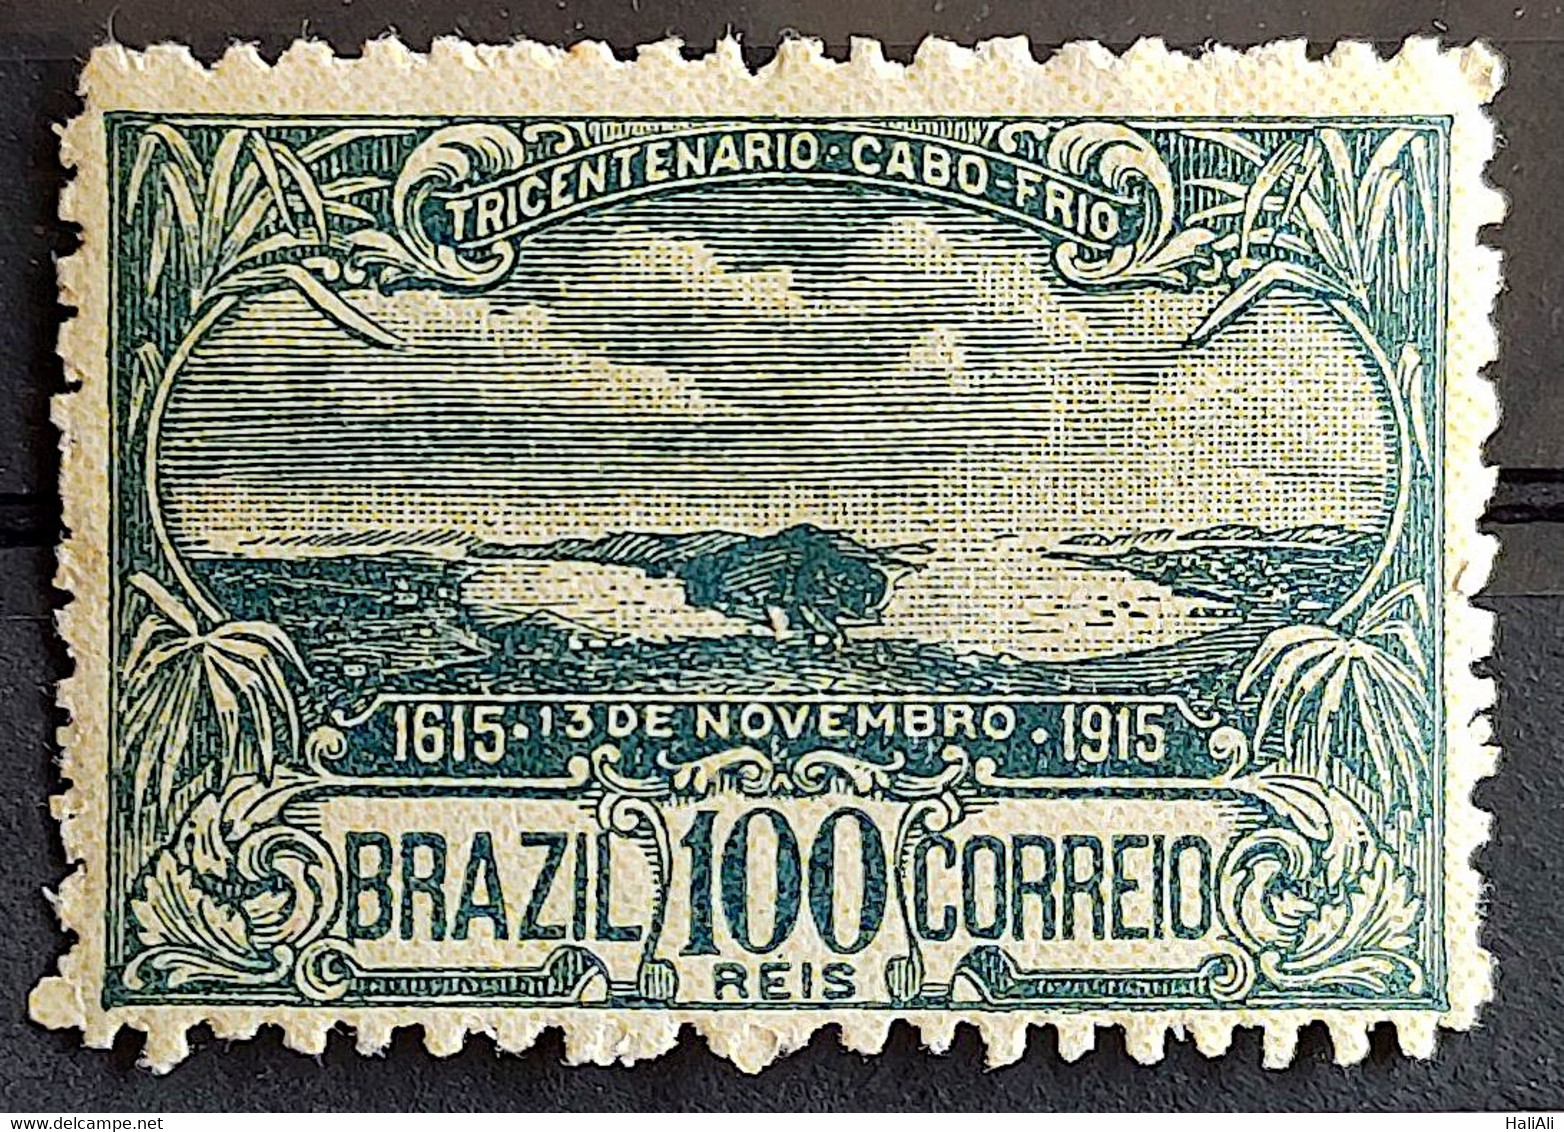 C 10 Brazil Stamp Tricentenary Cabo Frio 1915 6 - Unused Stamps